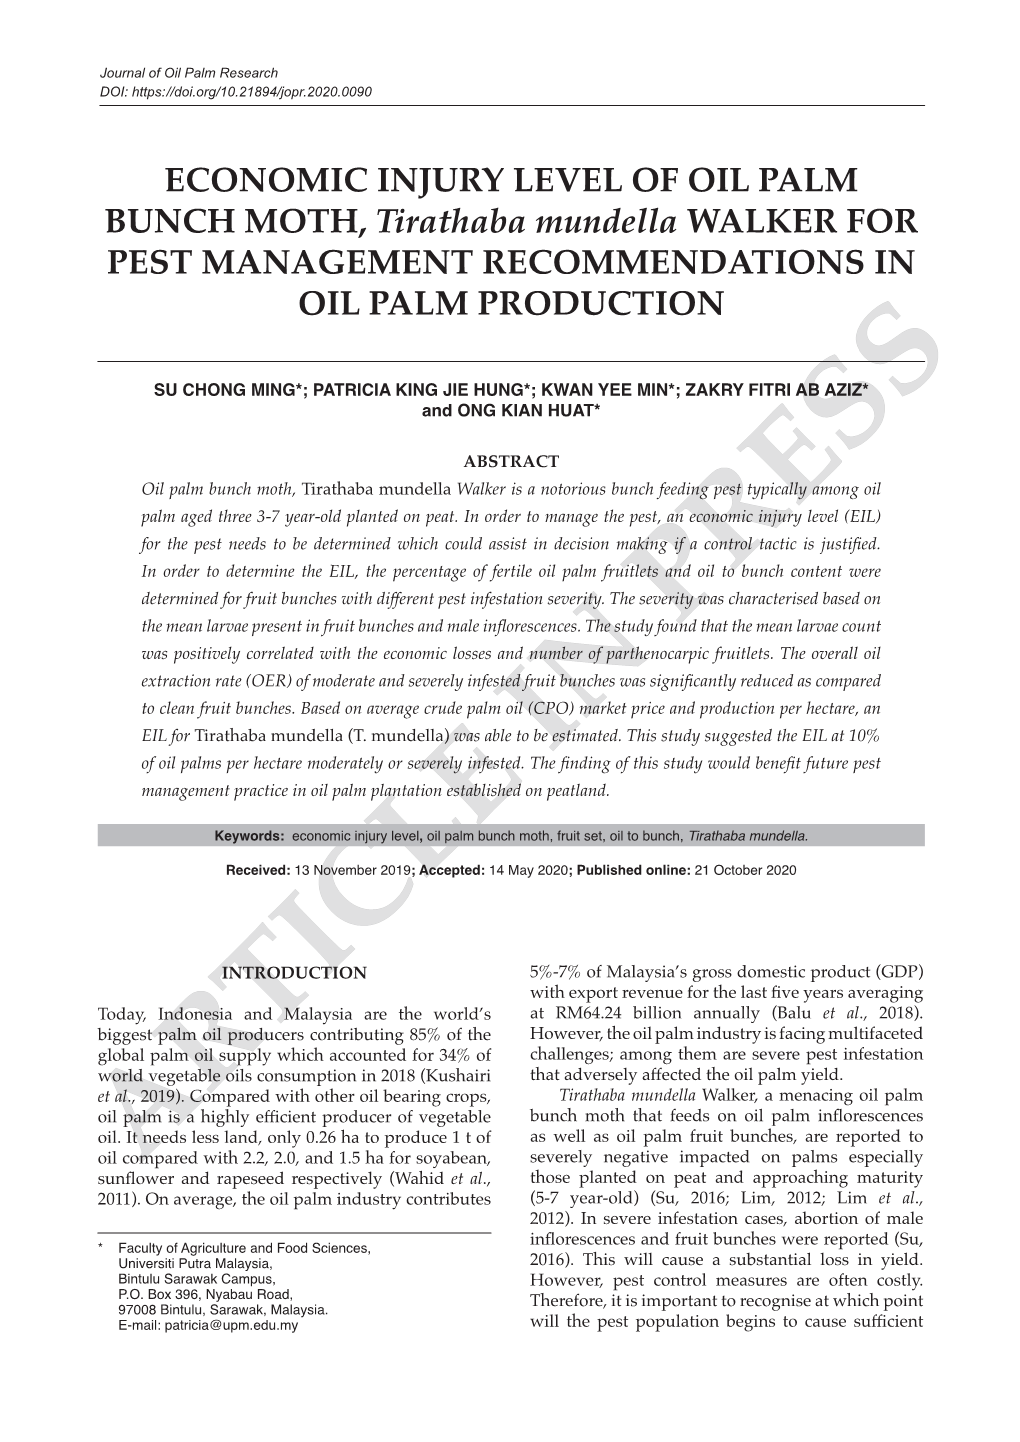 ECONOMIC INJURY LEVEL of OIL PALM BUNCH MOTH, Tirathaba Mundella WALKER for PEST MANAGEMENT RECOMMENDATIONS in OIL PALM PRODUCTION